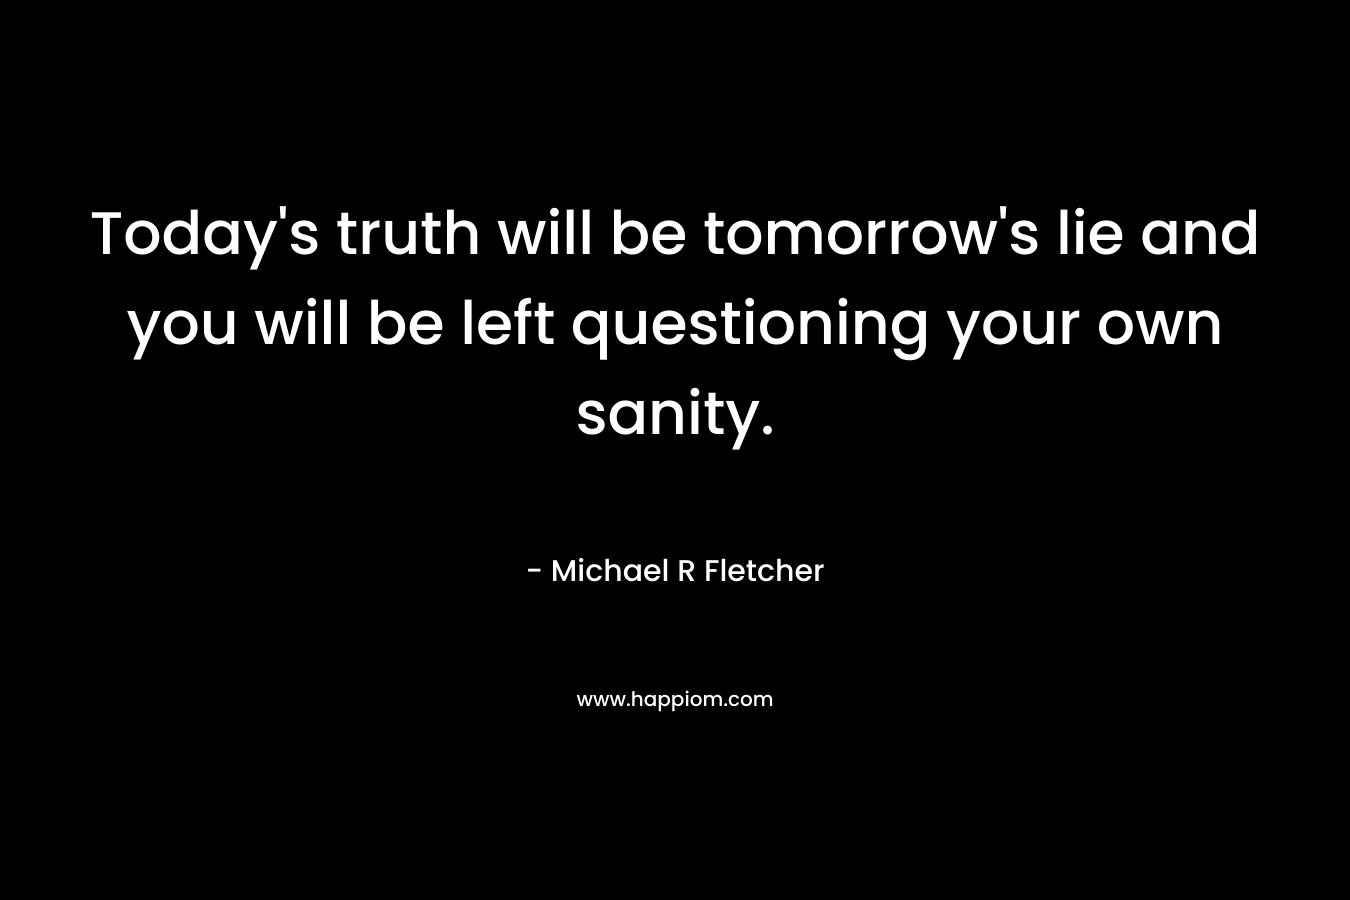 Today's truth will be tomorrow's lie and you will be left questioning your own sanity.